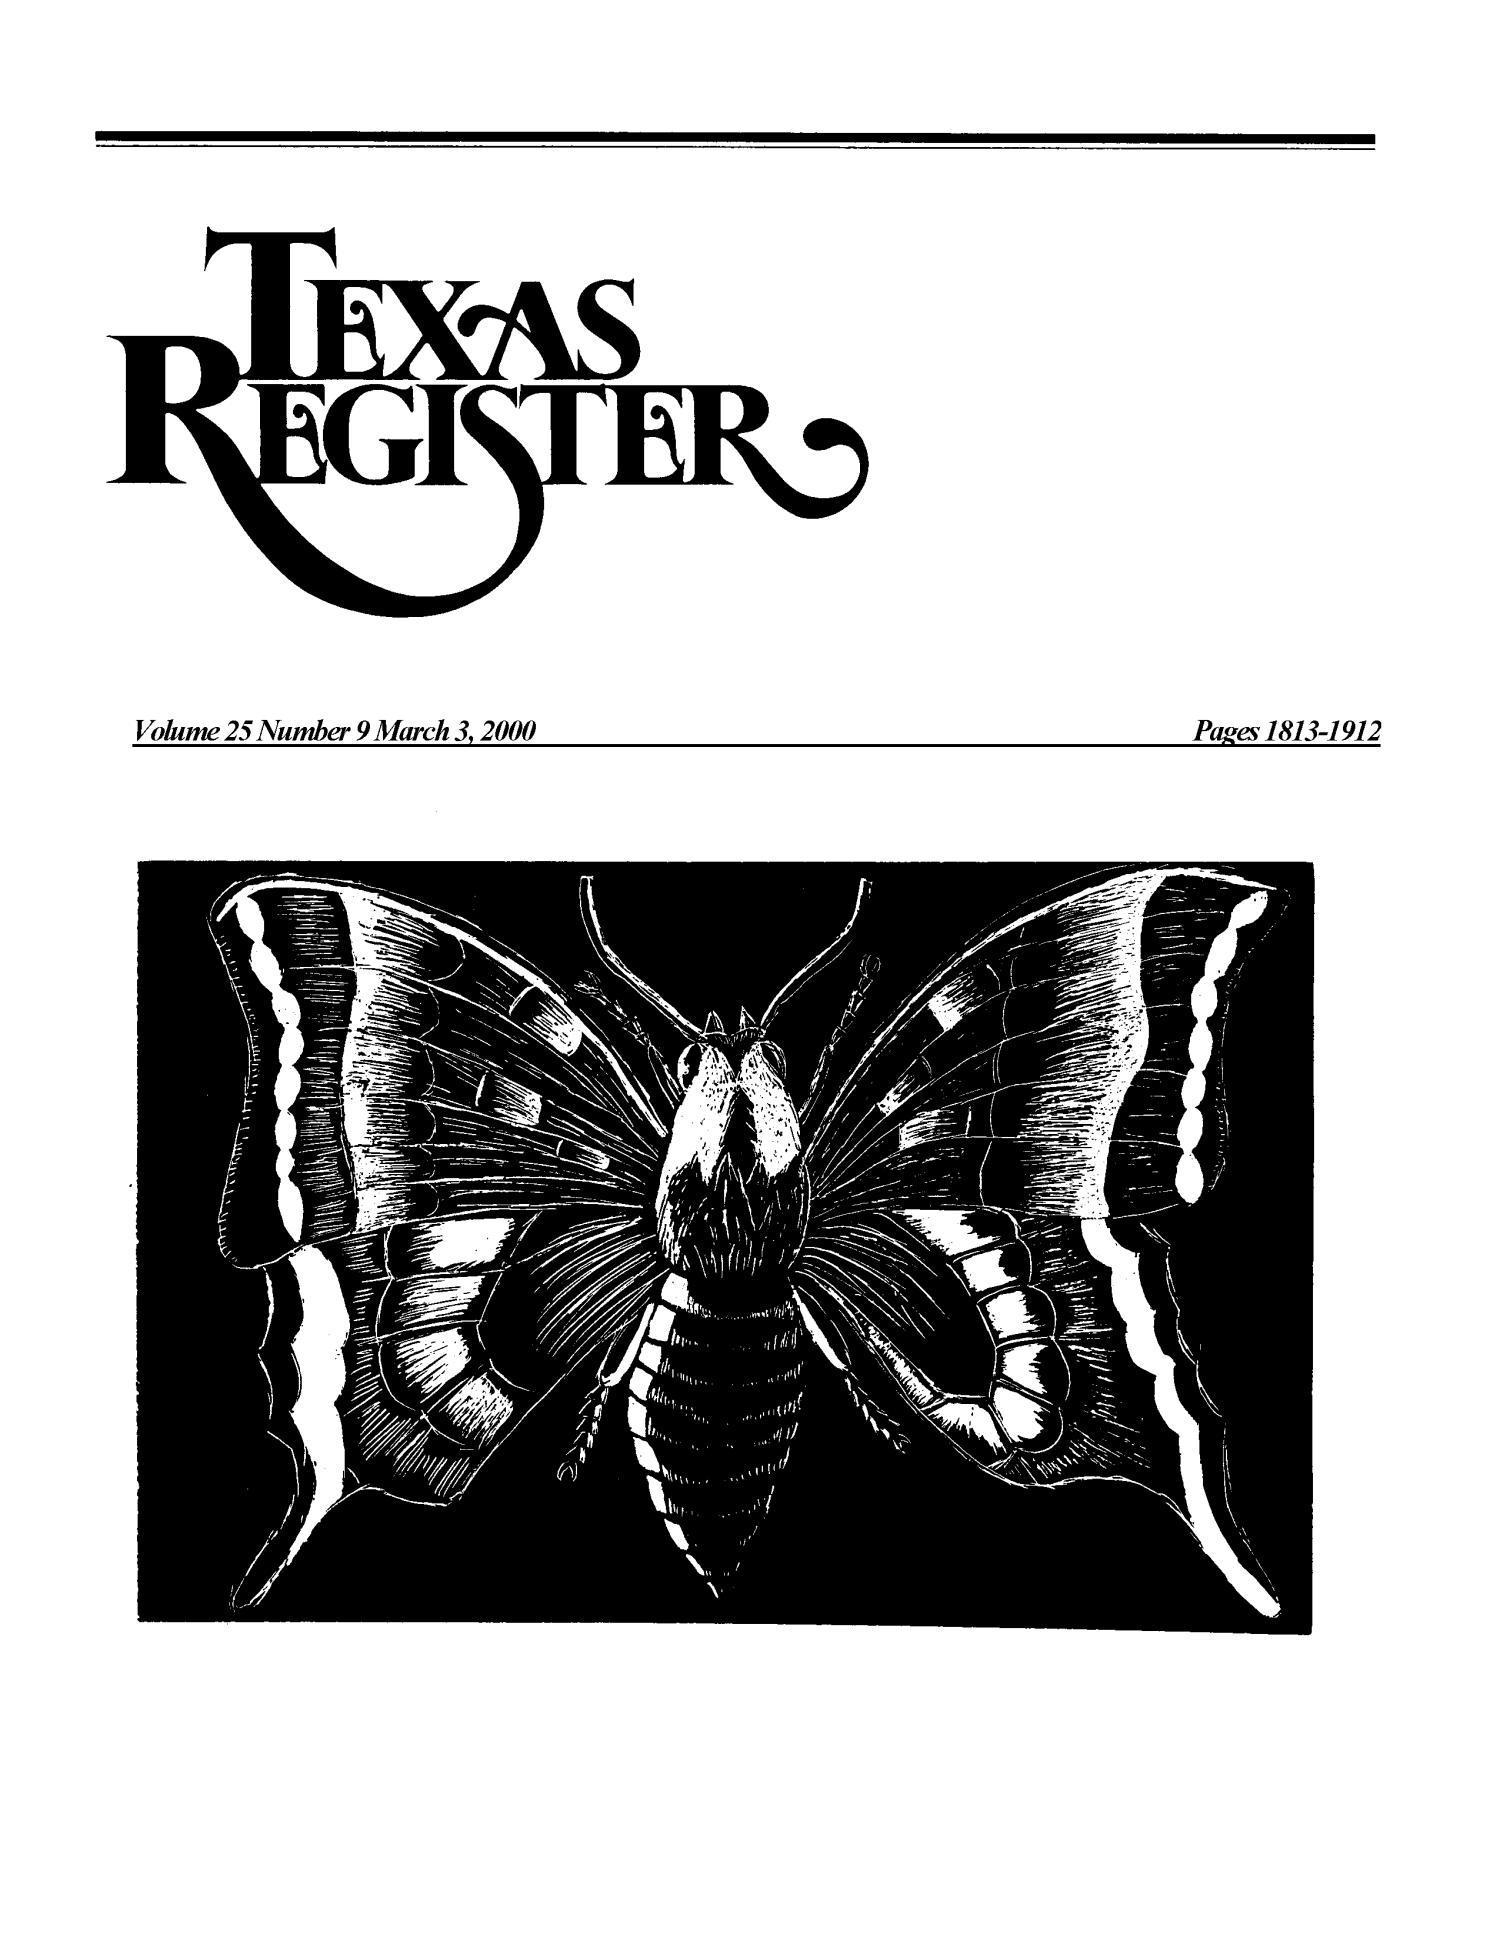 Texas Register, Volume 25, Number 9, Pages 1813-1912, March 03, 2000
                                                
                                                    1813
                                                